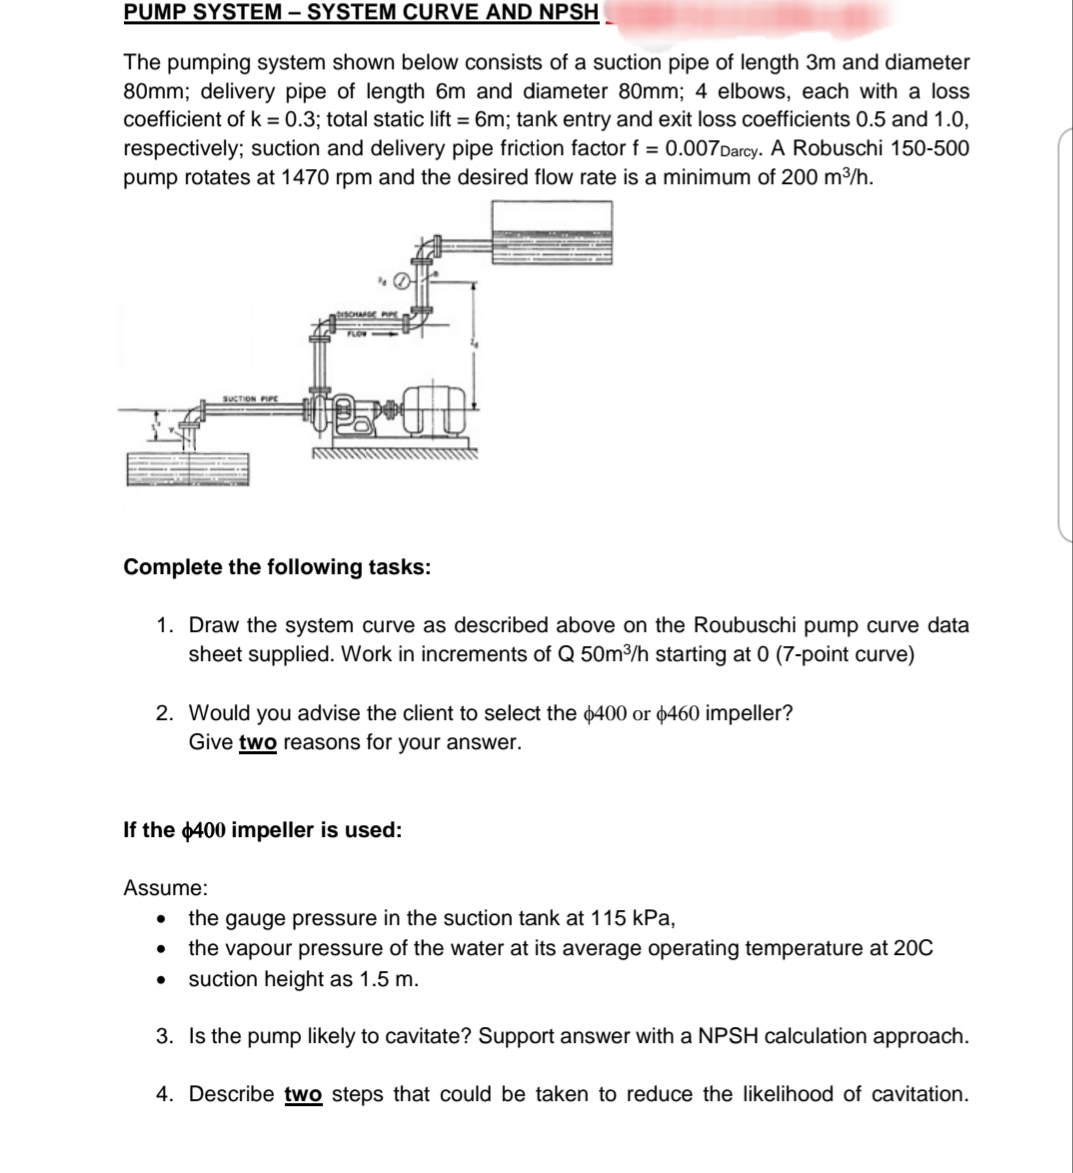 PUMP SYSTEM – SYSTEM CURVE AND NPSH
The pumping system shown below consists of a suction pipe of length 3m and diameter
80mm; delivery pipe of length 6m and diameter 80mm; 4 elbows, each with a loss
coefficient of k = 0.3; total static lift = 6m; tank entry and exit loss coefficients 0.5 and 1.0,
respectively; suction and delivery pipe friction factor f = 0.007Darcy. A Robuschi 150-500
pump rotates at 1470 rpm and the desired flow rate is a minimum of 200 m3/h.
SUCTION PIPE
Complete the following tasks:
1. Draw the system curve as described above on the Roubuschi pump curve data
sheet supplied. Work in increments of Q 50m3/h starting at 0 (7-point curve)
2. Would you advise the client to select the p400 or ¢460 impeller?
Give two reasons for your answer.
If the 400 impeller is used:
Assume:
the gauge pressure in the suction tank at 115 kPa,
the vapour pressure of the water at its average operating temperature at 20C
suction height as 1.5 m.
3. Is the pump likely to cavitate? Support answer with a NPSH calculation approach.
4. Describe two steps that could be taken to reduce the likelihood of cavitation.
